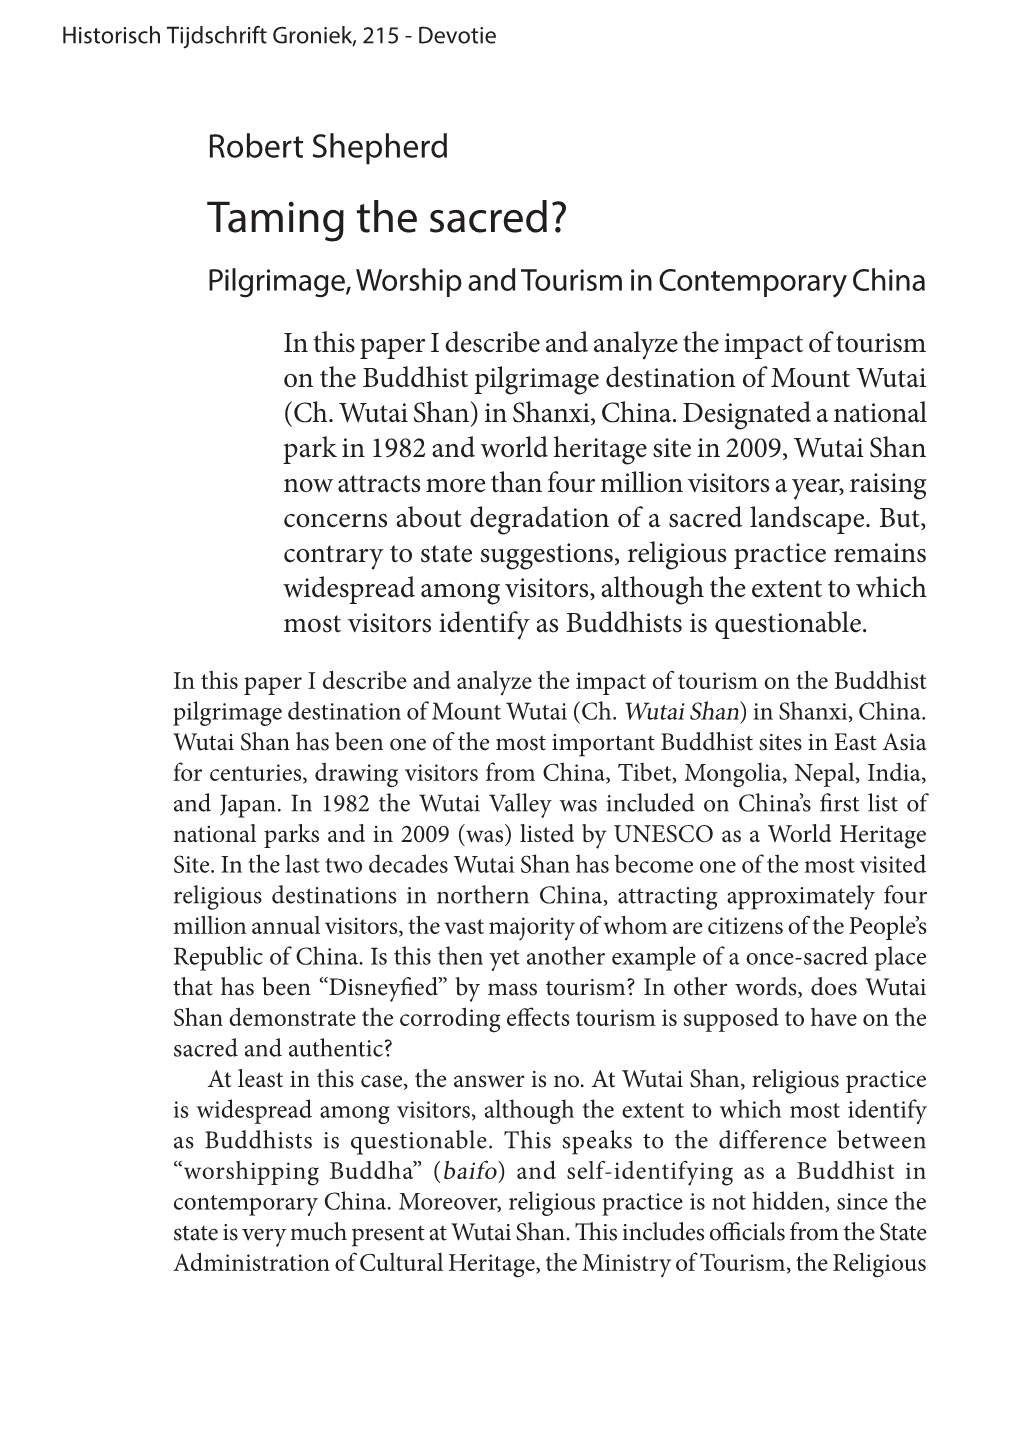 Taming the Sacred? Pilgrimage, Worship and Tourism in Contemporary China